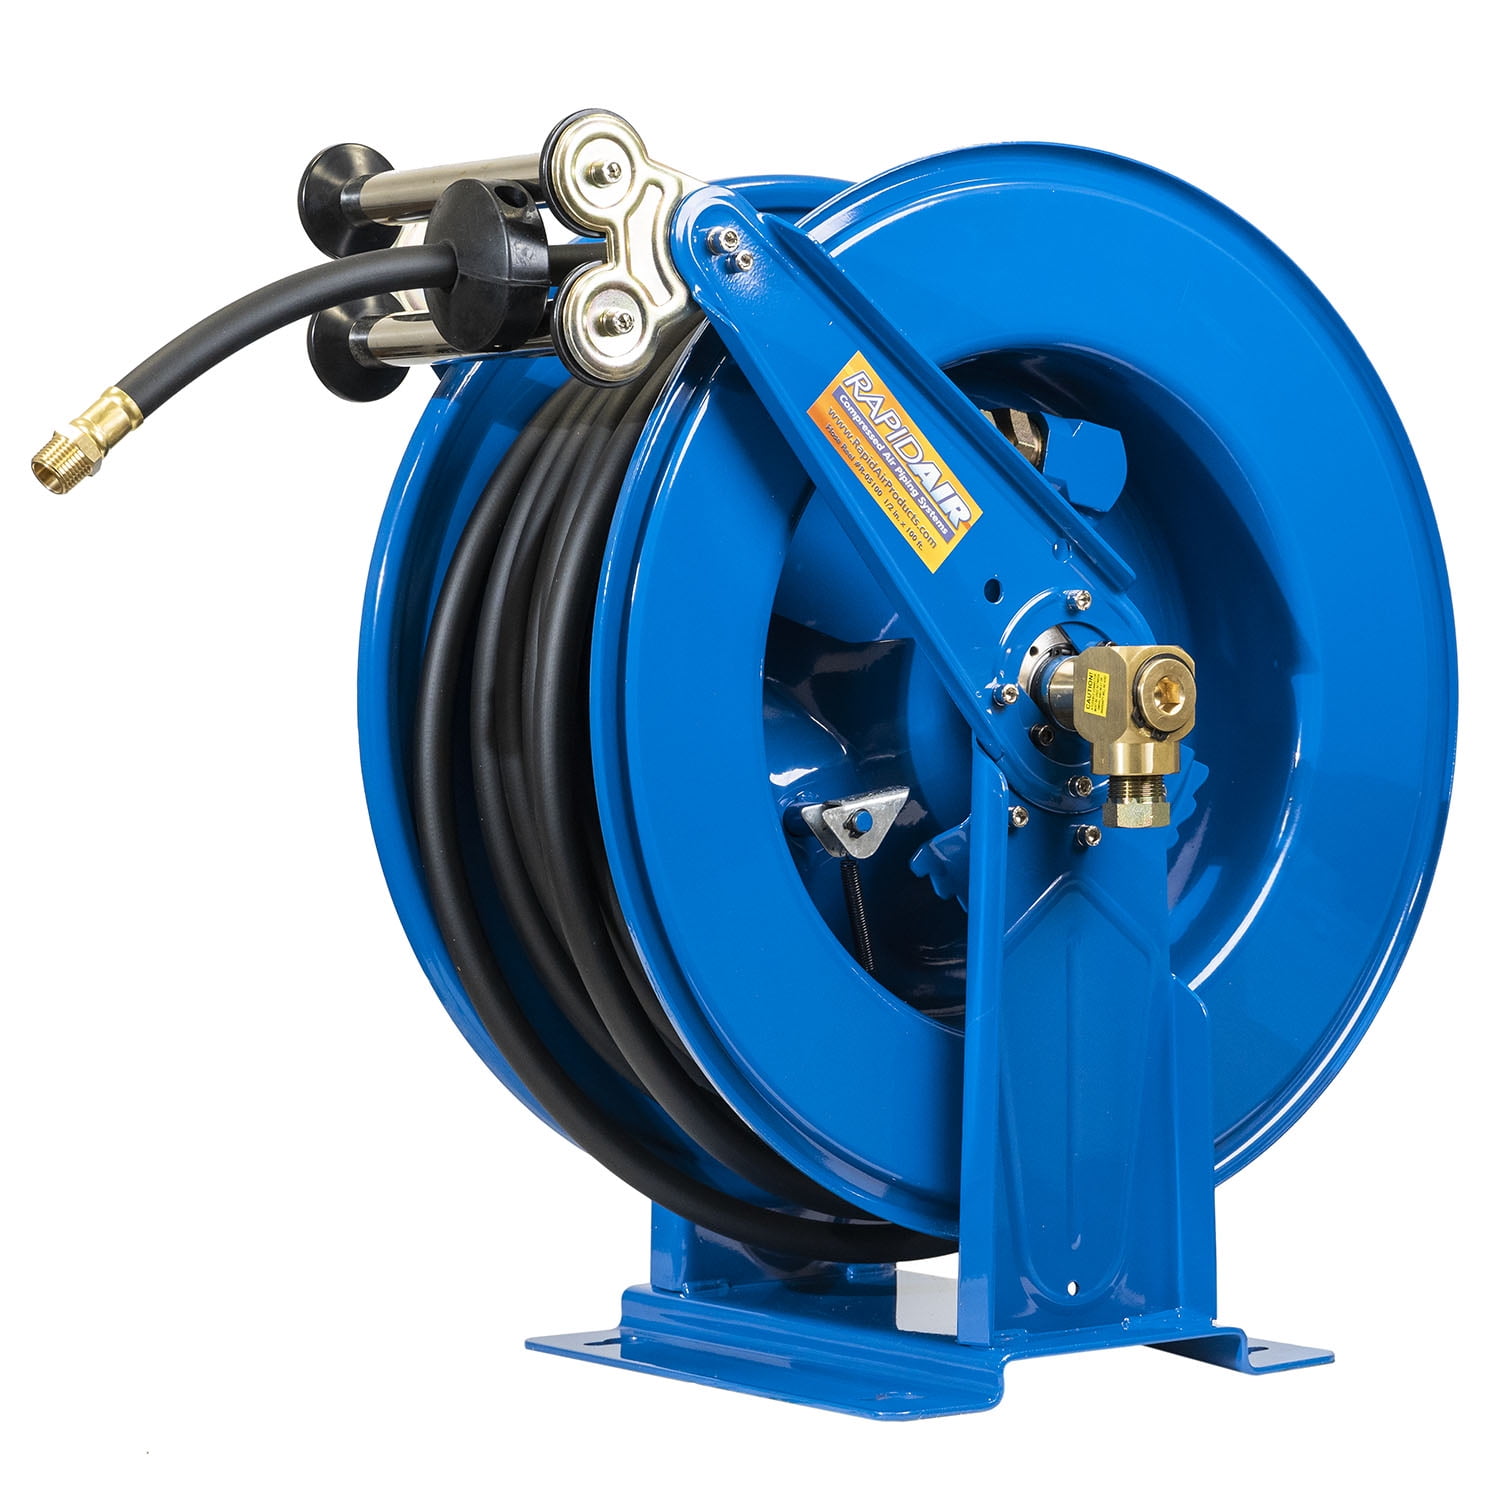 Rapidair 1/2 x 100' Dual Arm Steel Hose Reel 1/2 Inlet and Outlet R-05100  